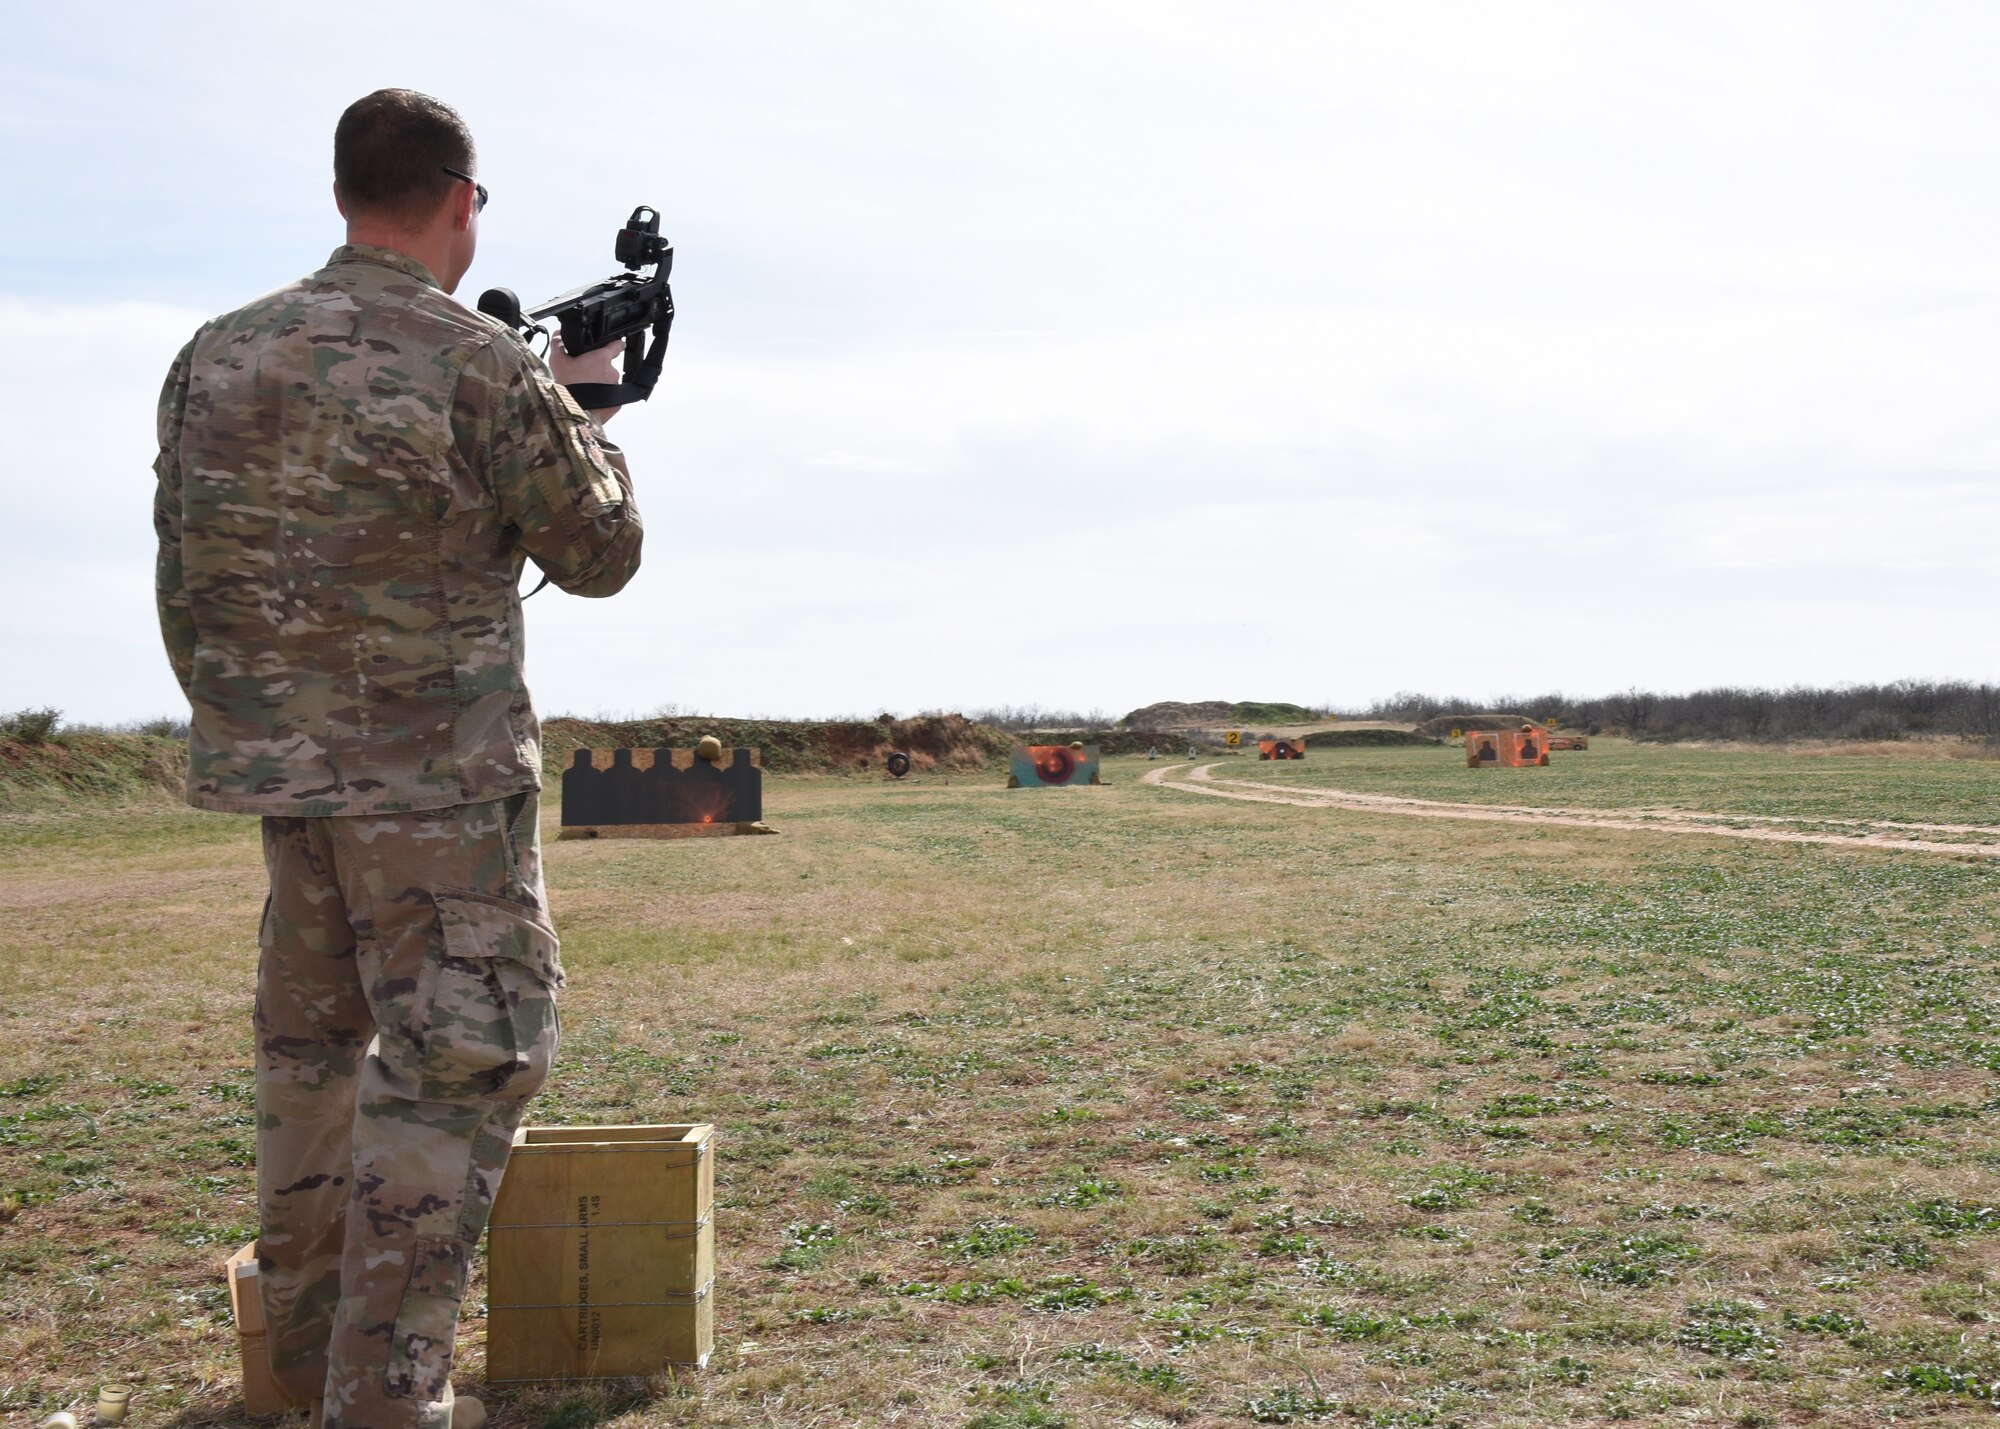 U.S. Air Force Master Sgt. Seth Swaboski, 17th Security Forces Squadron advisor, looks down the San Angelo Police Department firing range during a demonstration, Texas, Feb. 15, 2019. Members from Goodfellow spent the afternoon firing M203 grenade launchers, soon to be retired, and the M320 grenade launchers, which are taking their place. (U.S. Air Force photo by Airman 1st Class Zachary Chapman/Released)